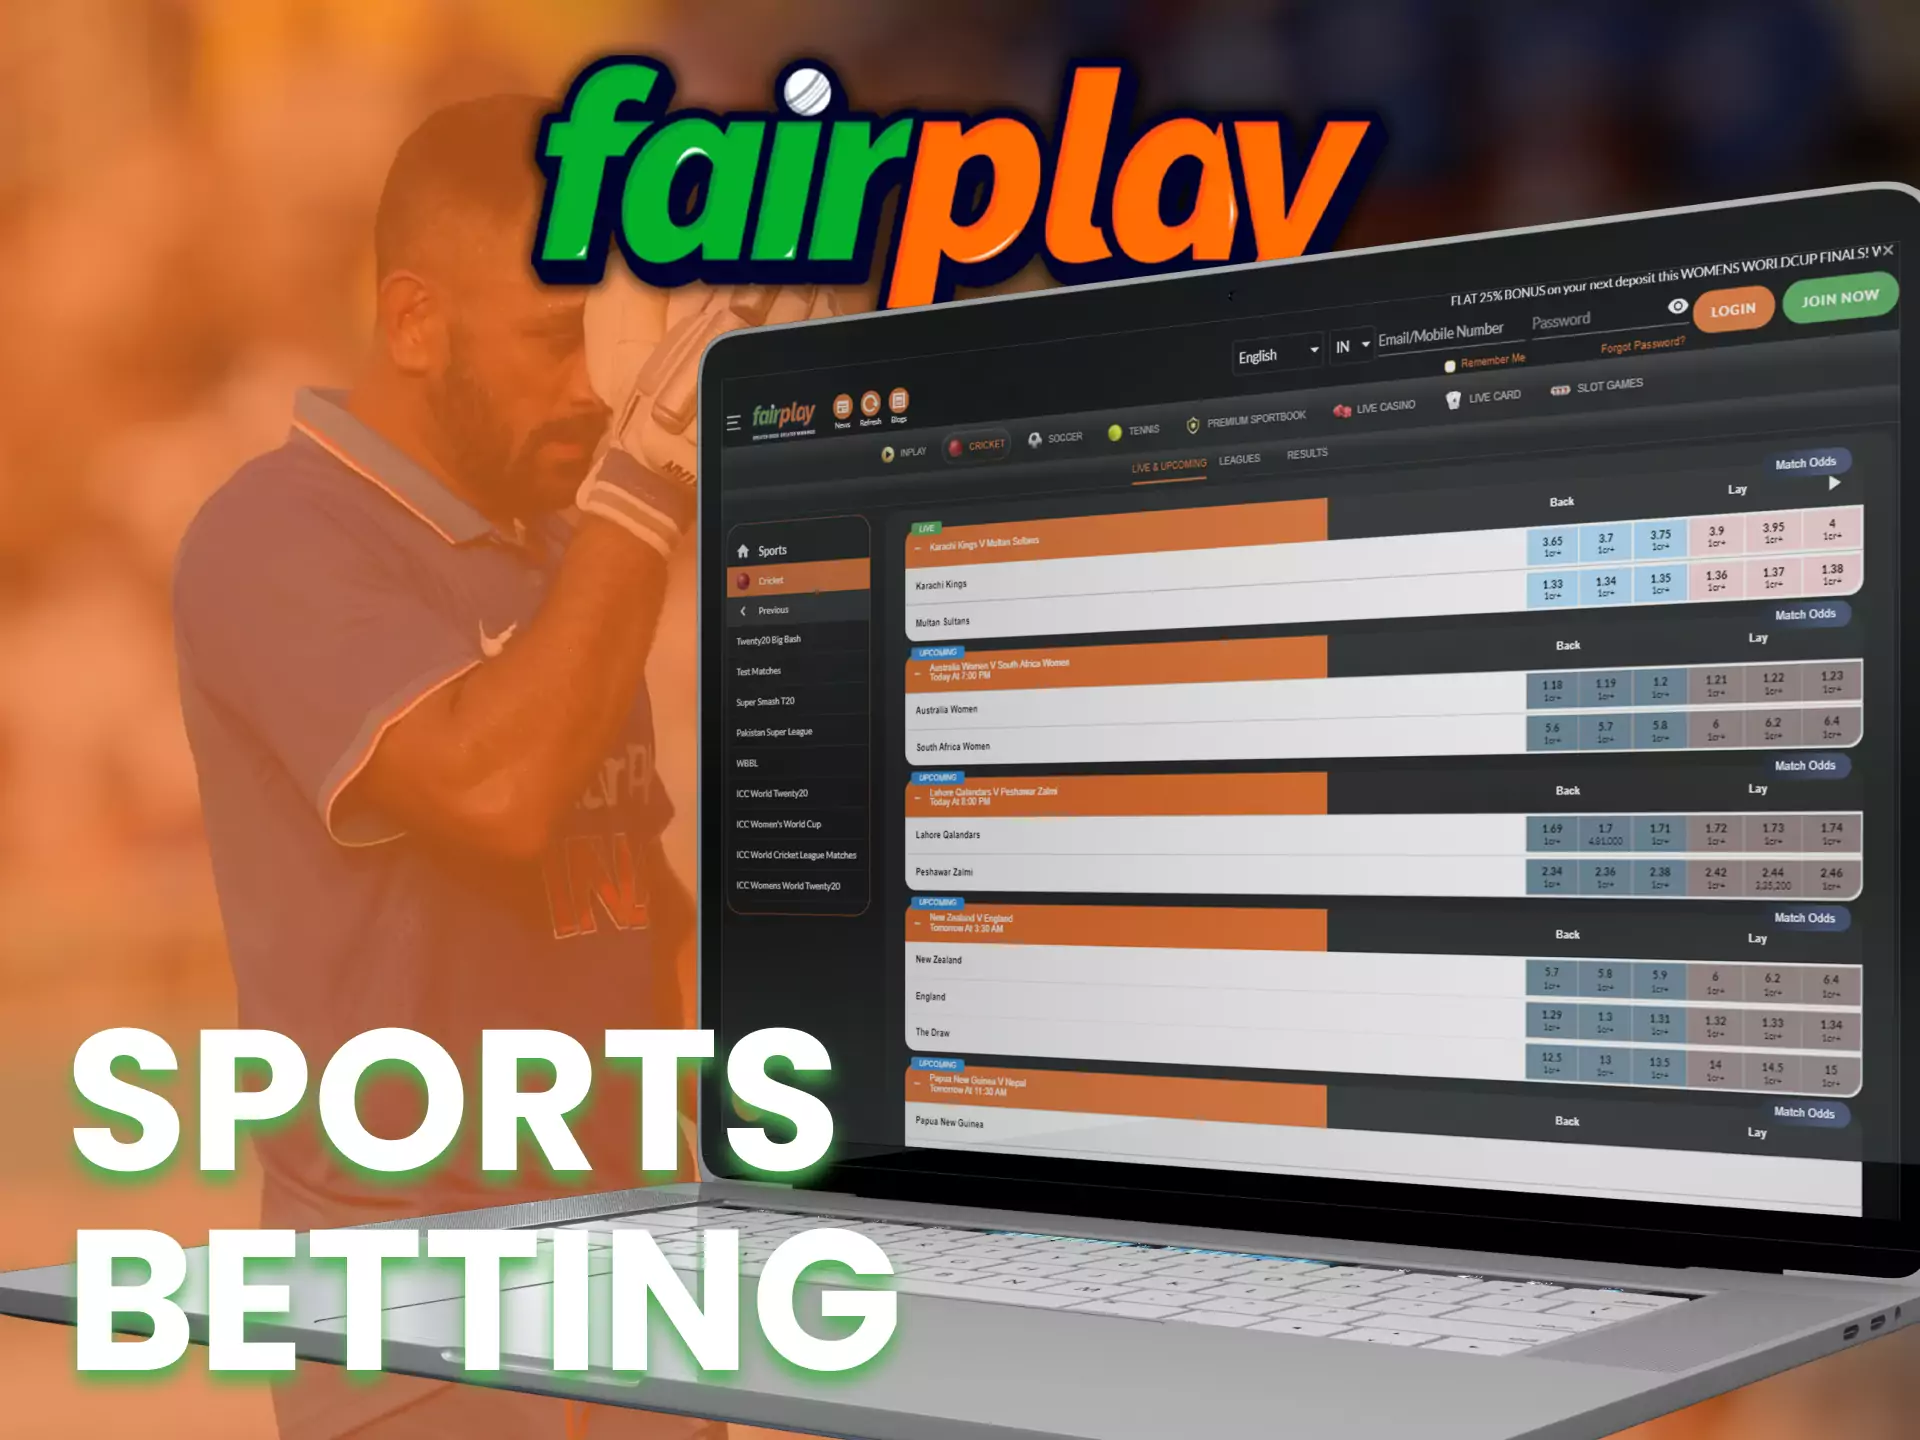 At Fairplay, bet on a variety of sports.